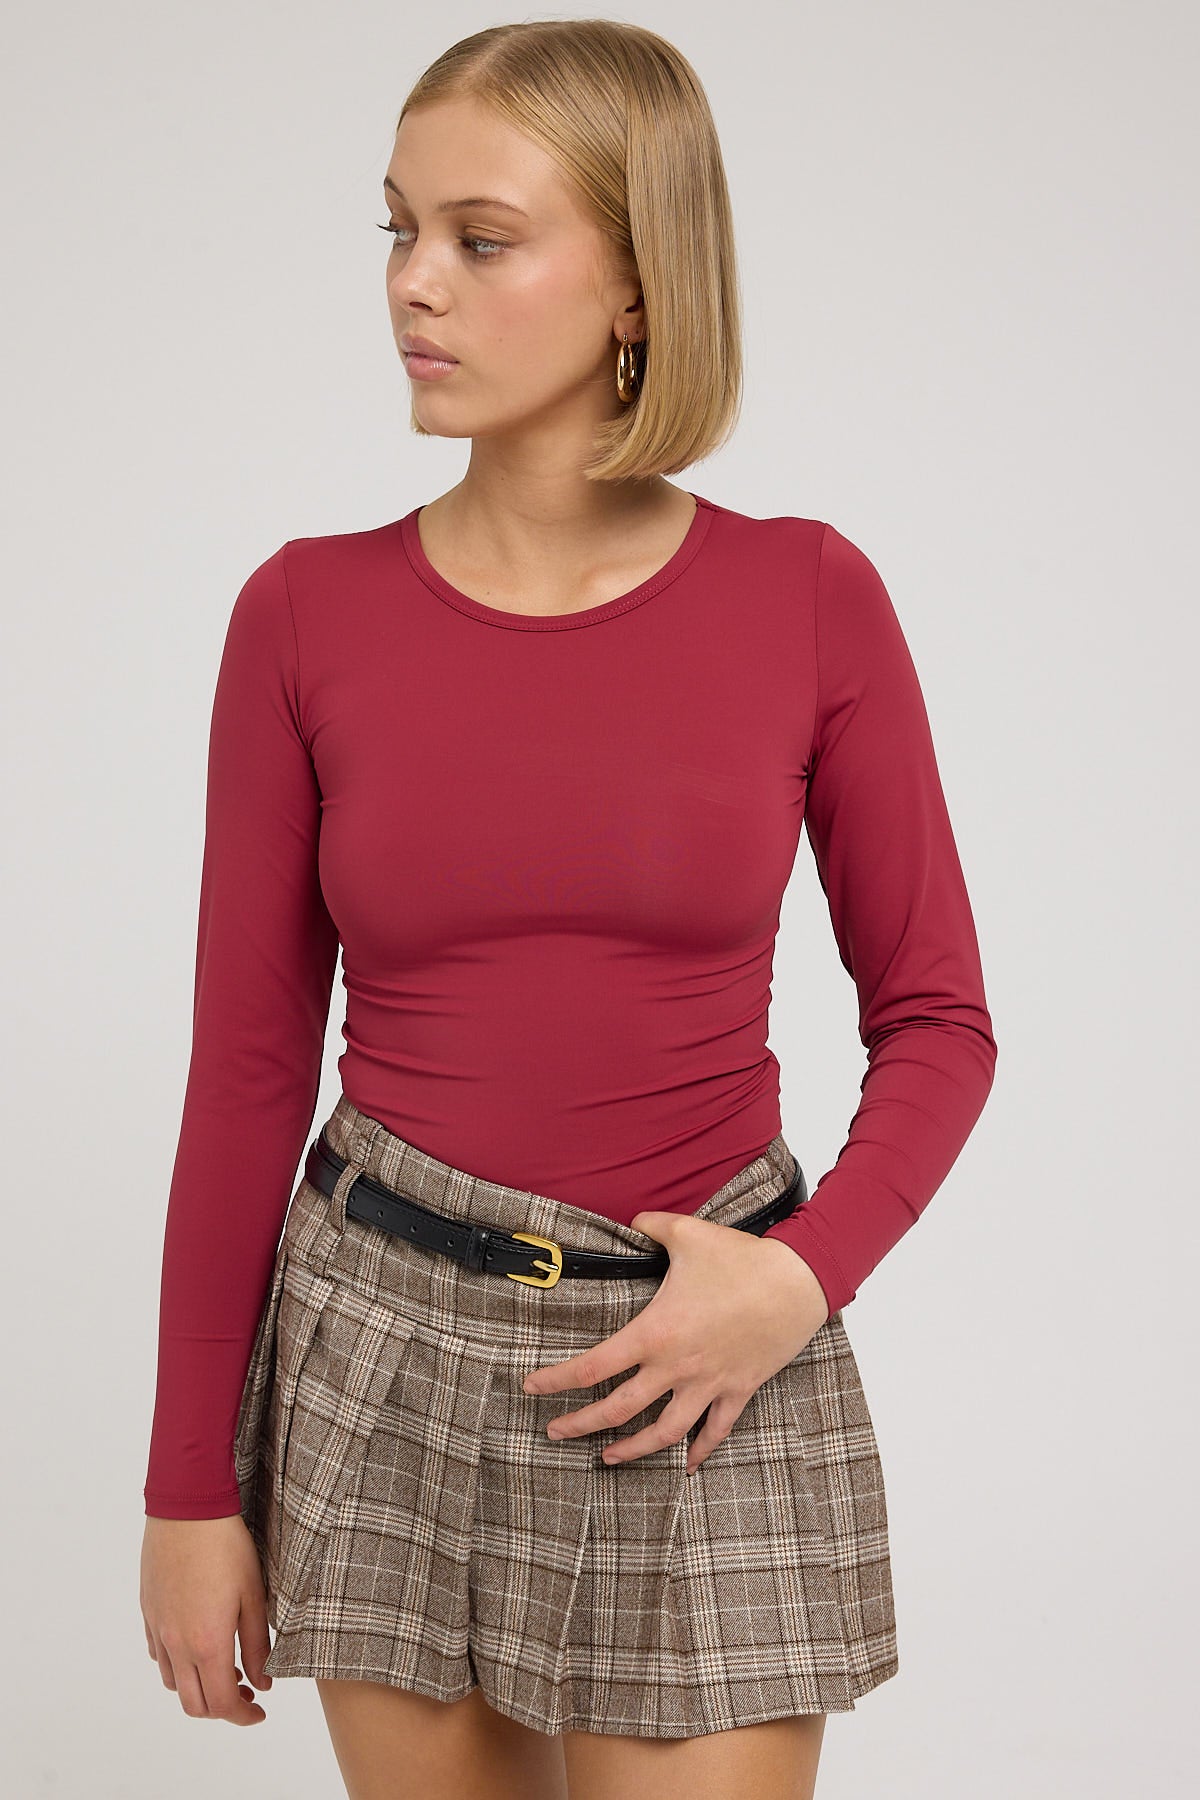 All About Eve Eve Staple Long Sleeve Port